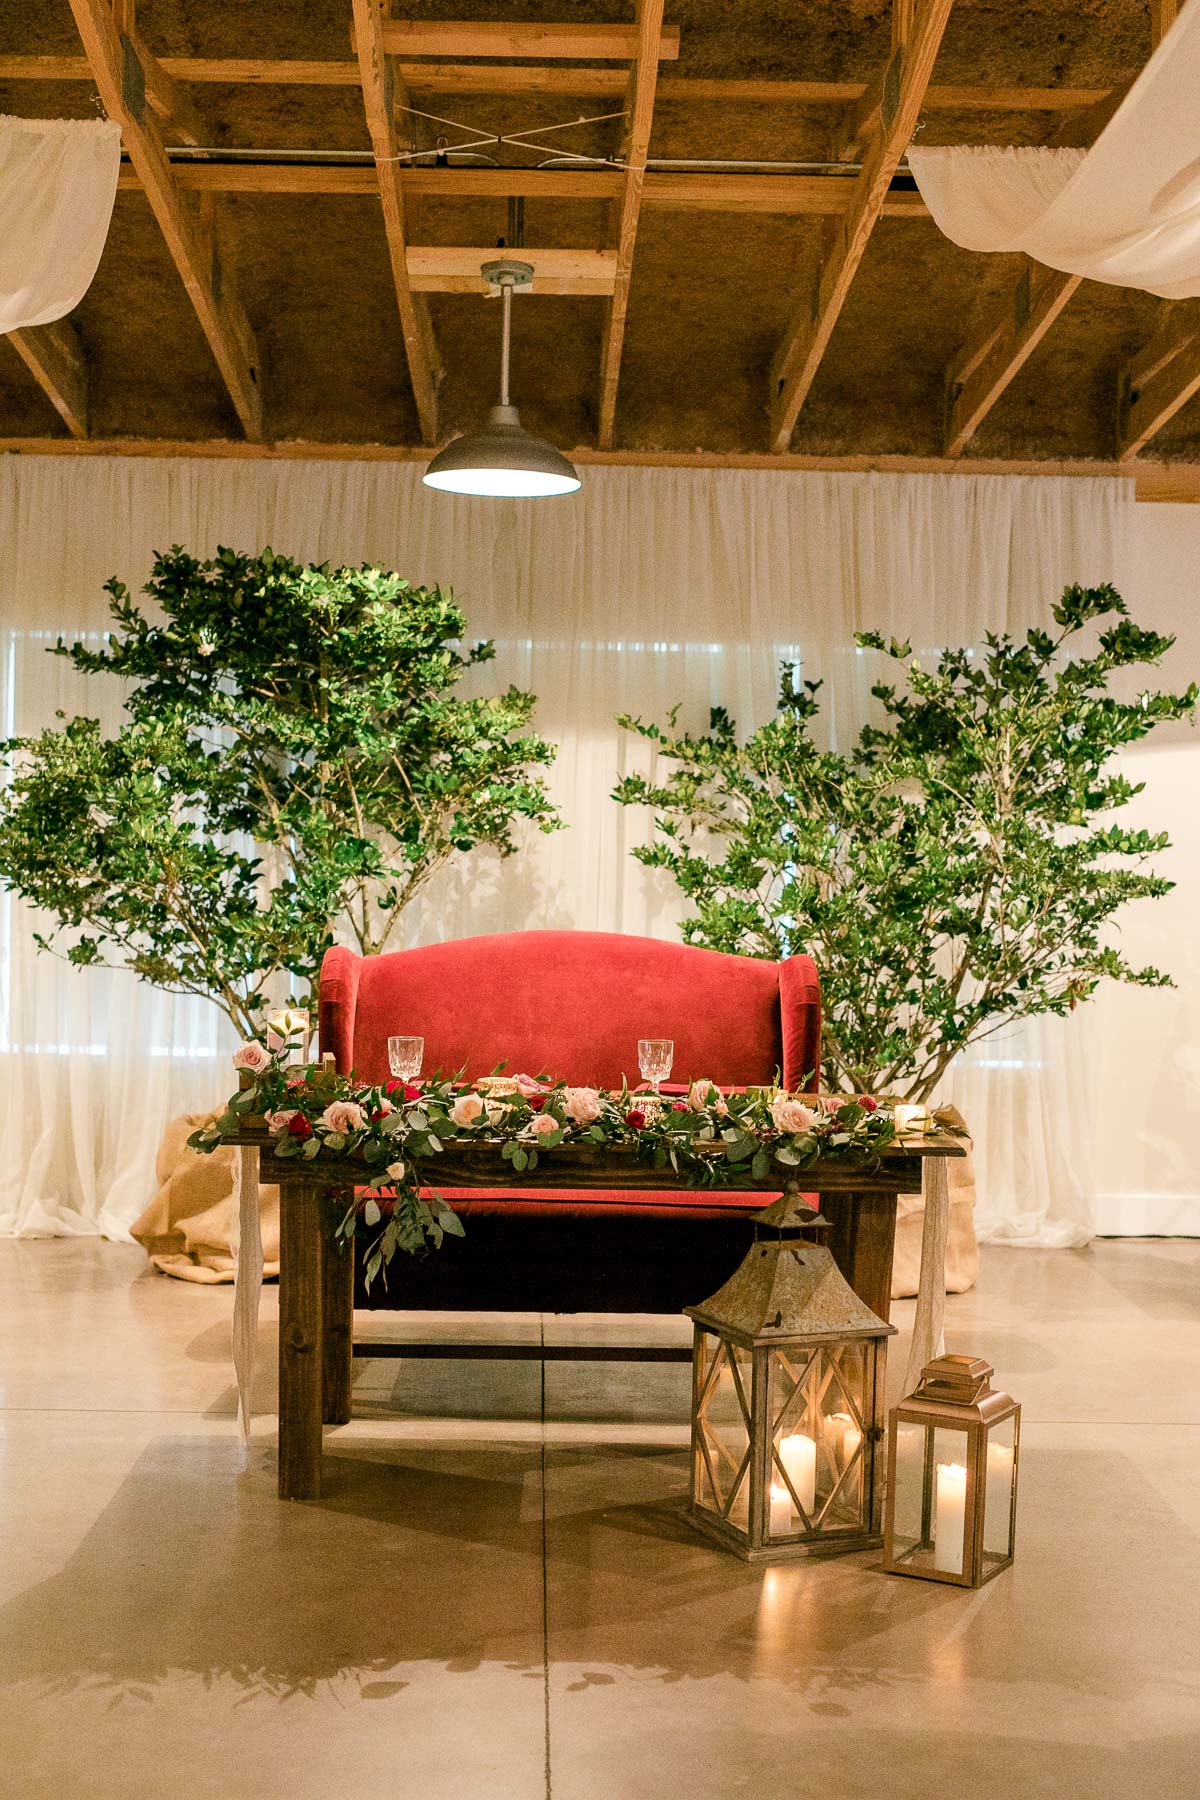 Sweetheart table with a large red couch